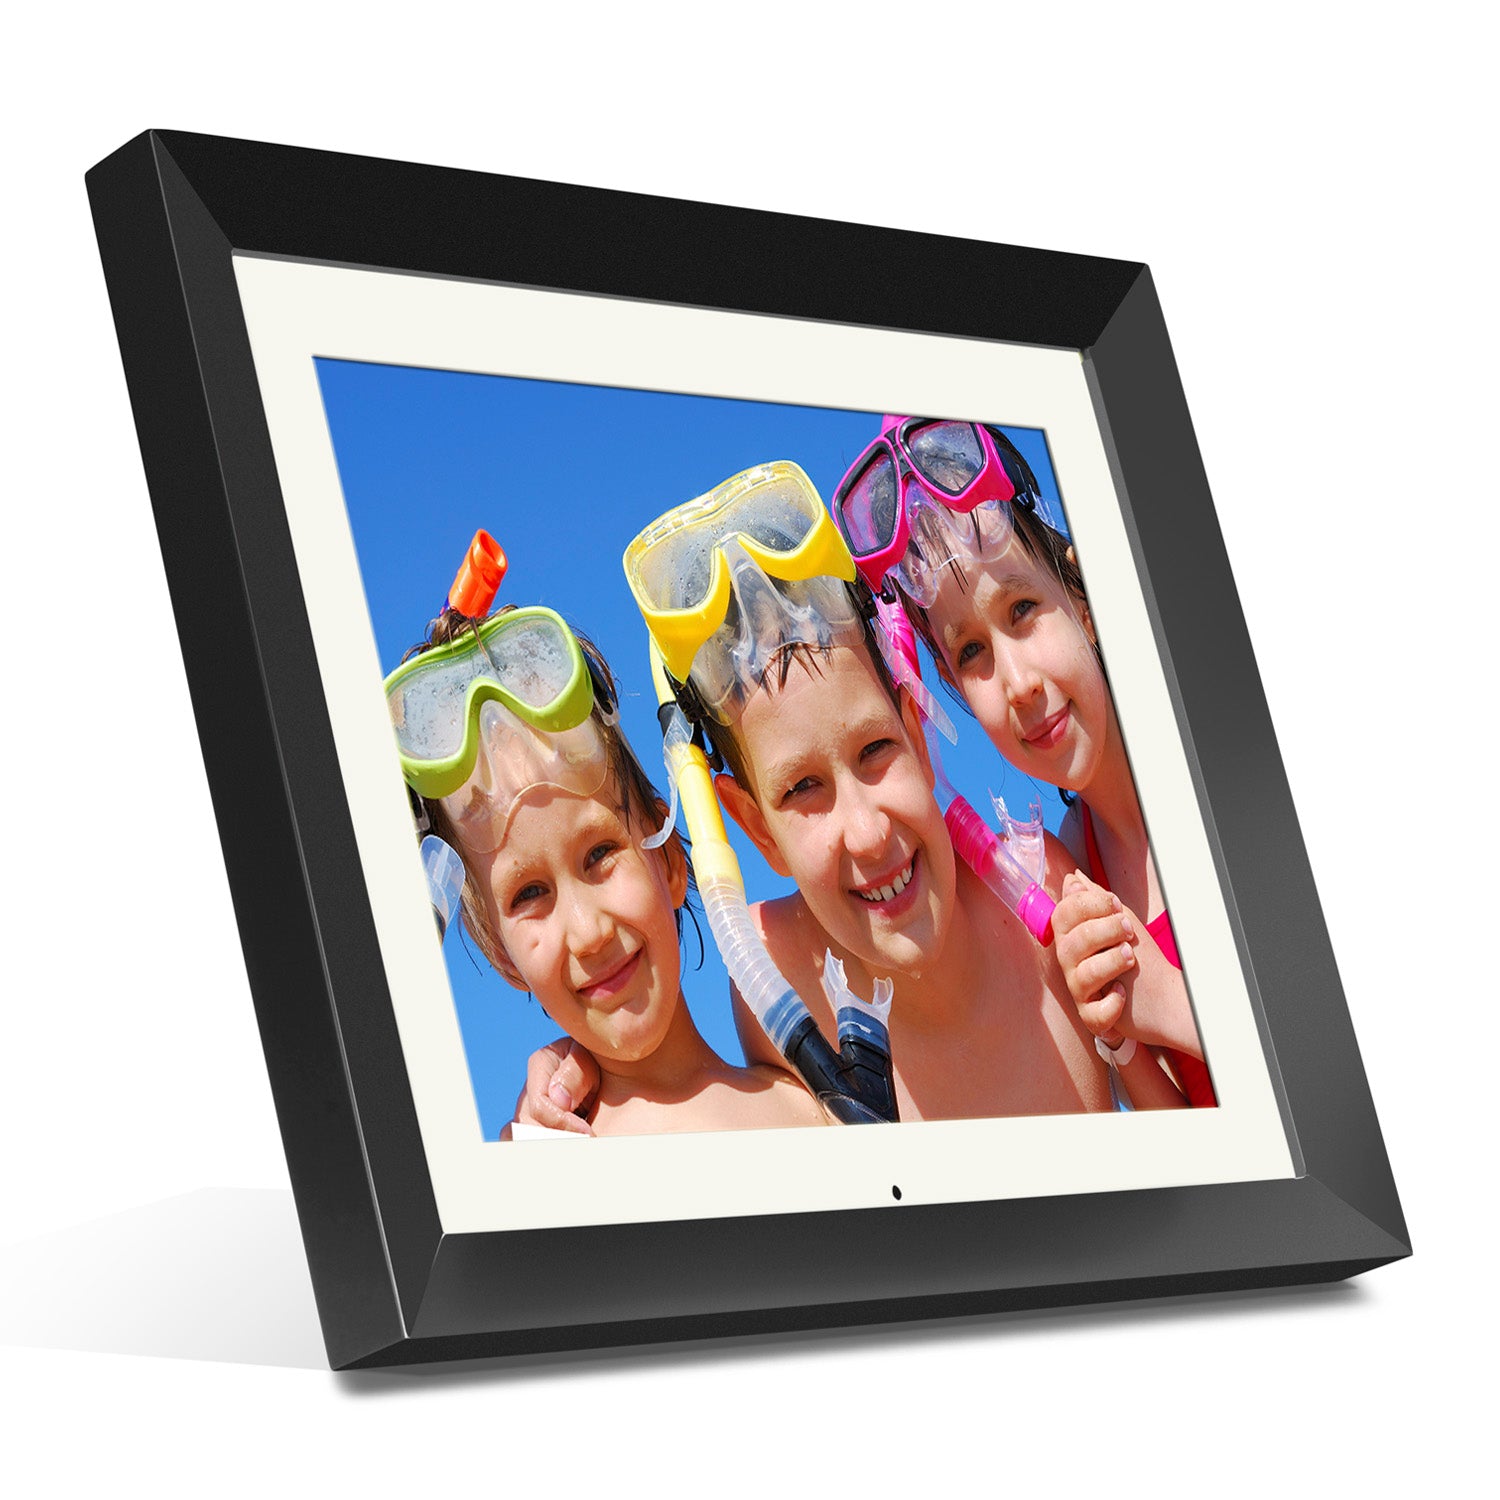 Digital Photo Frame with 2 GB Built-in Memory - 15 inch